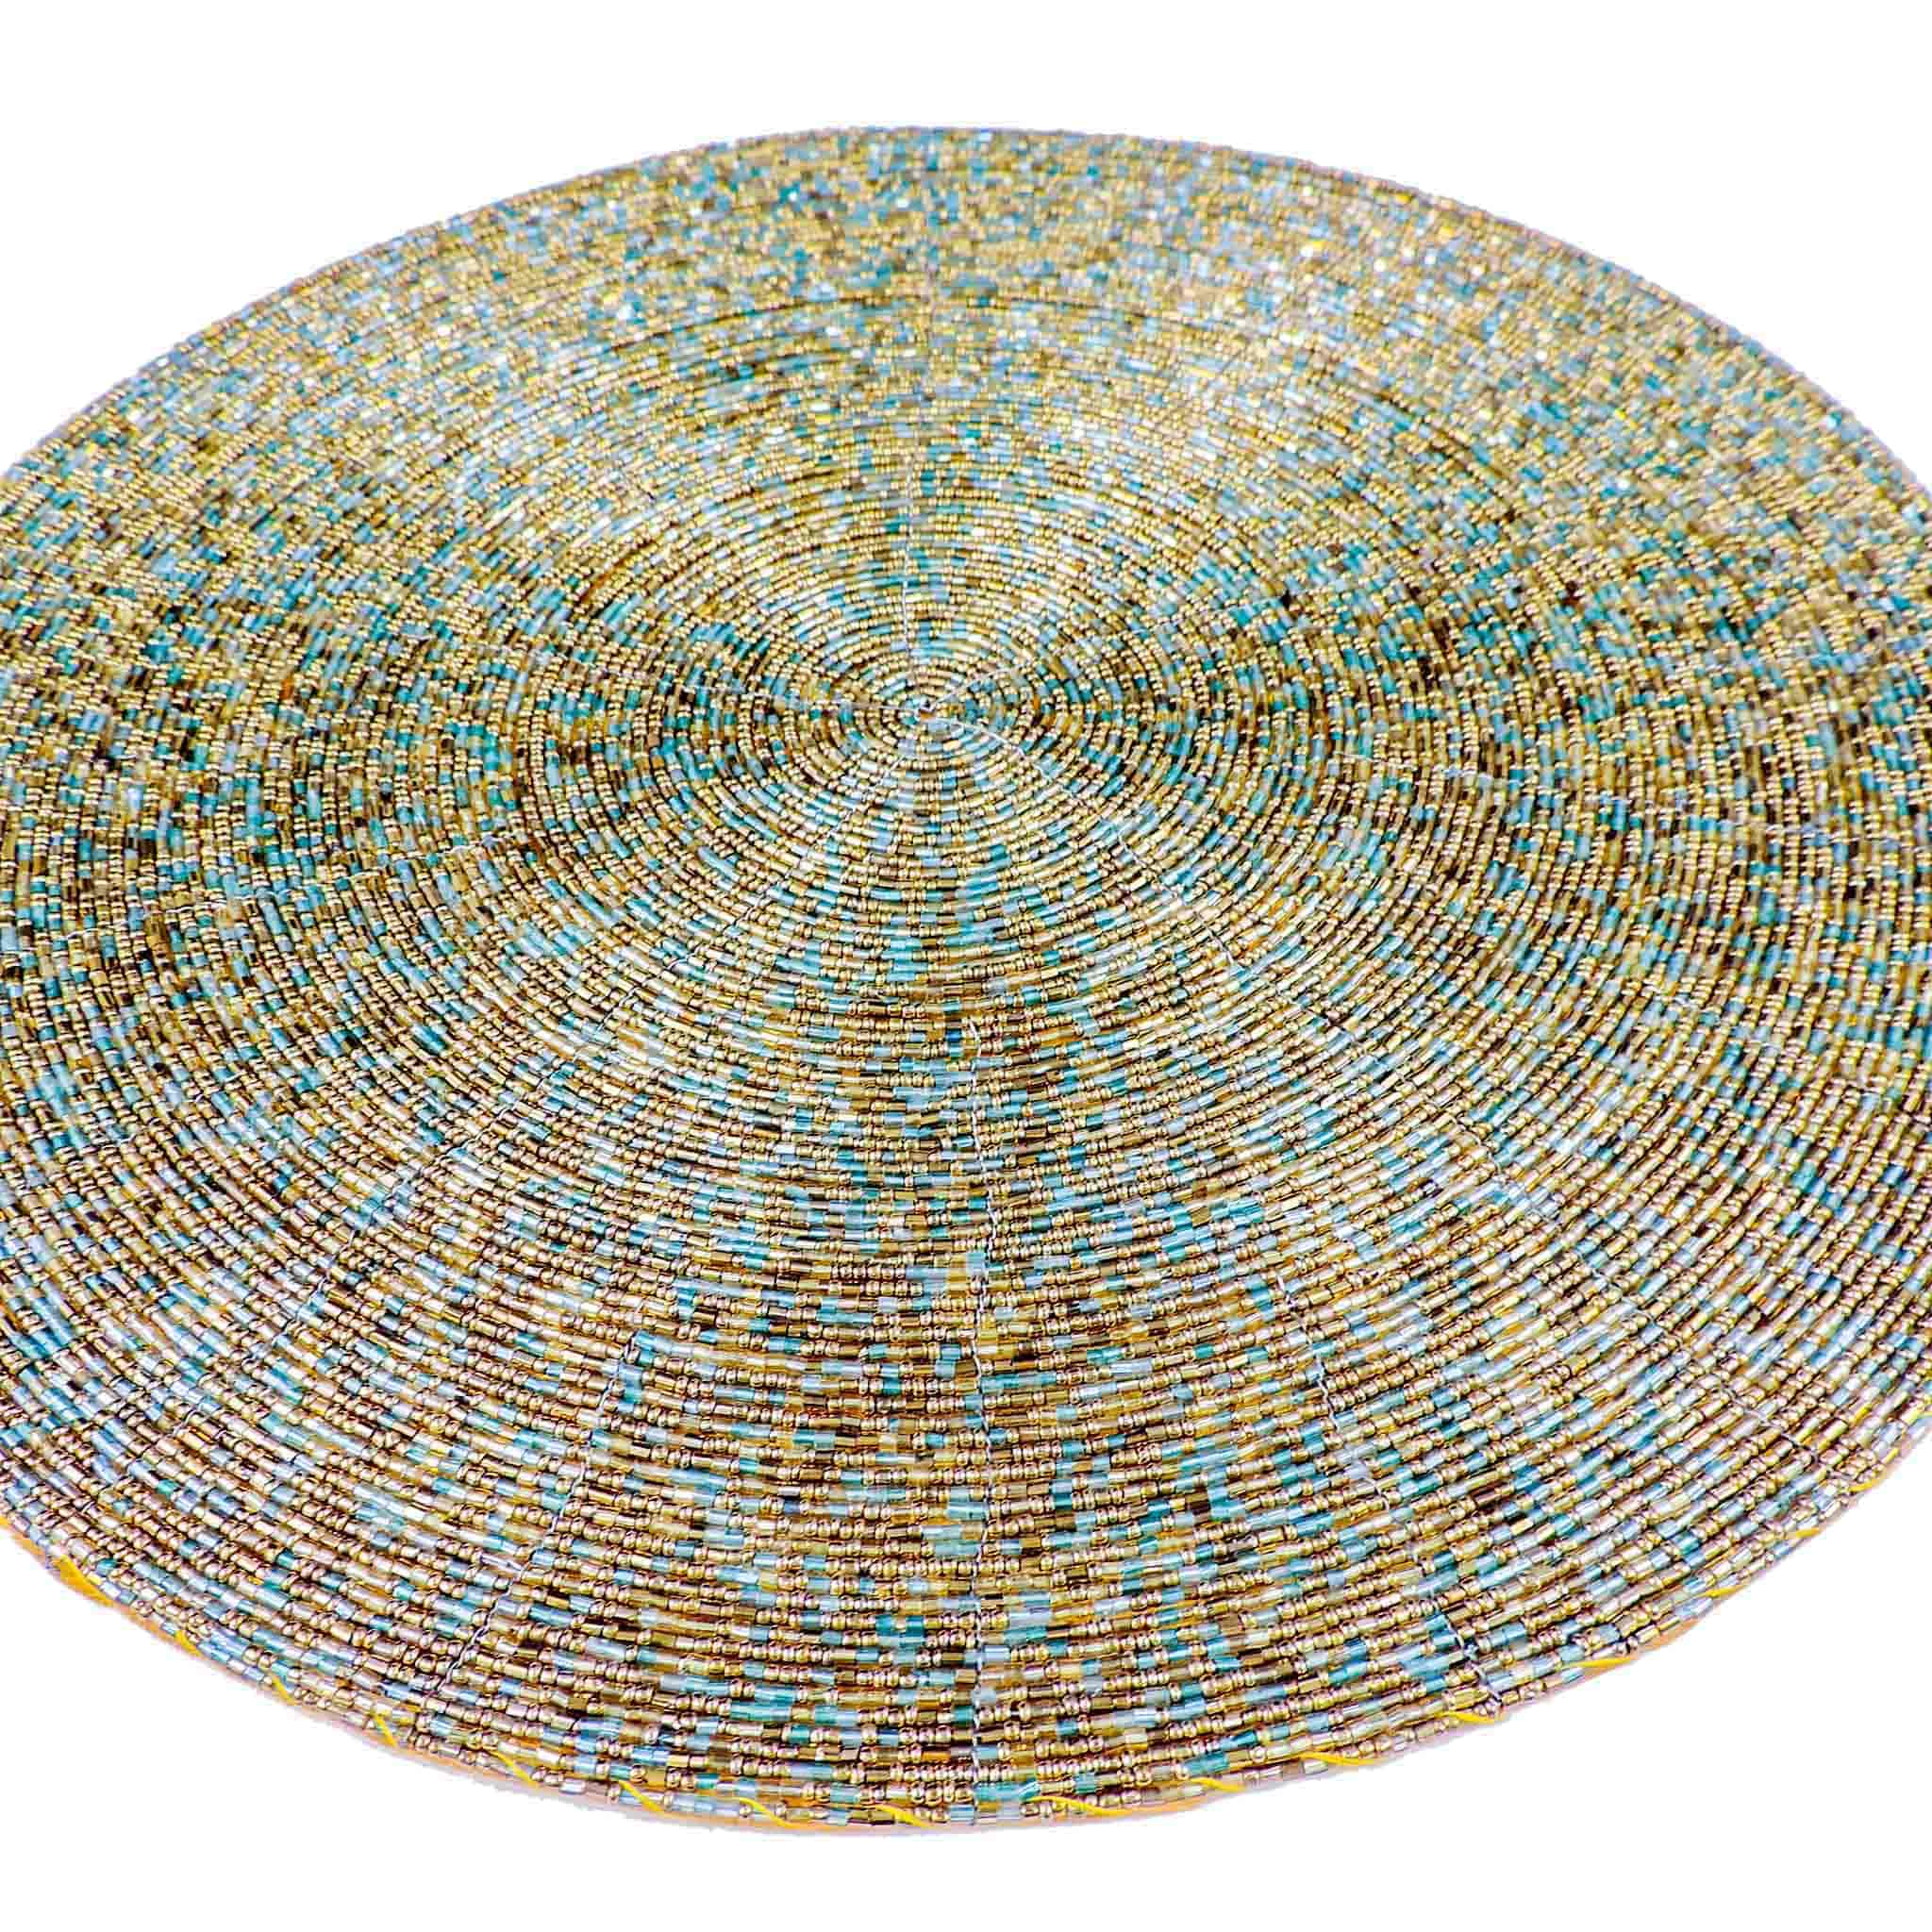 Glass Beaded Placemat in Peacock, Set of 4